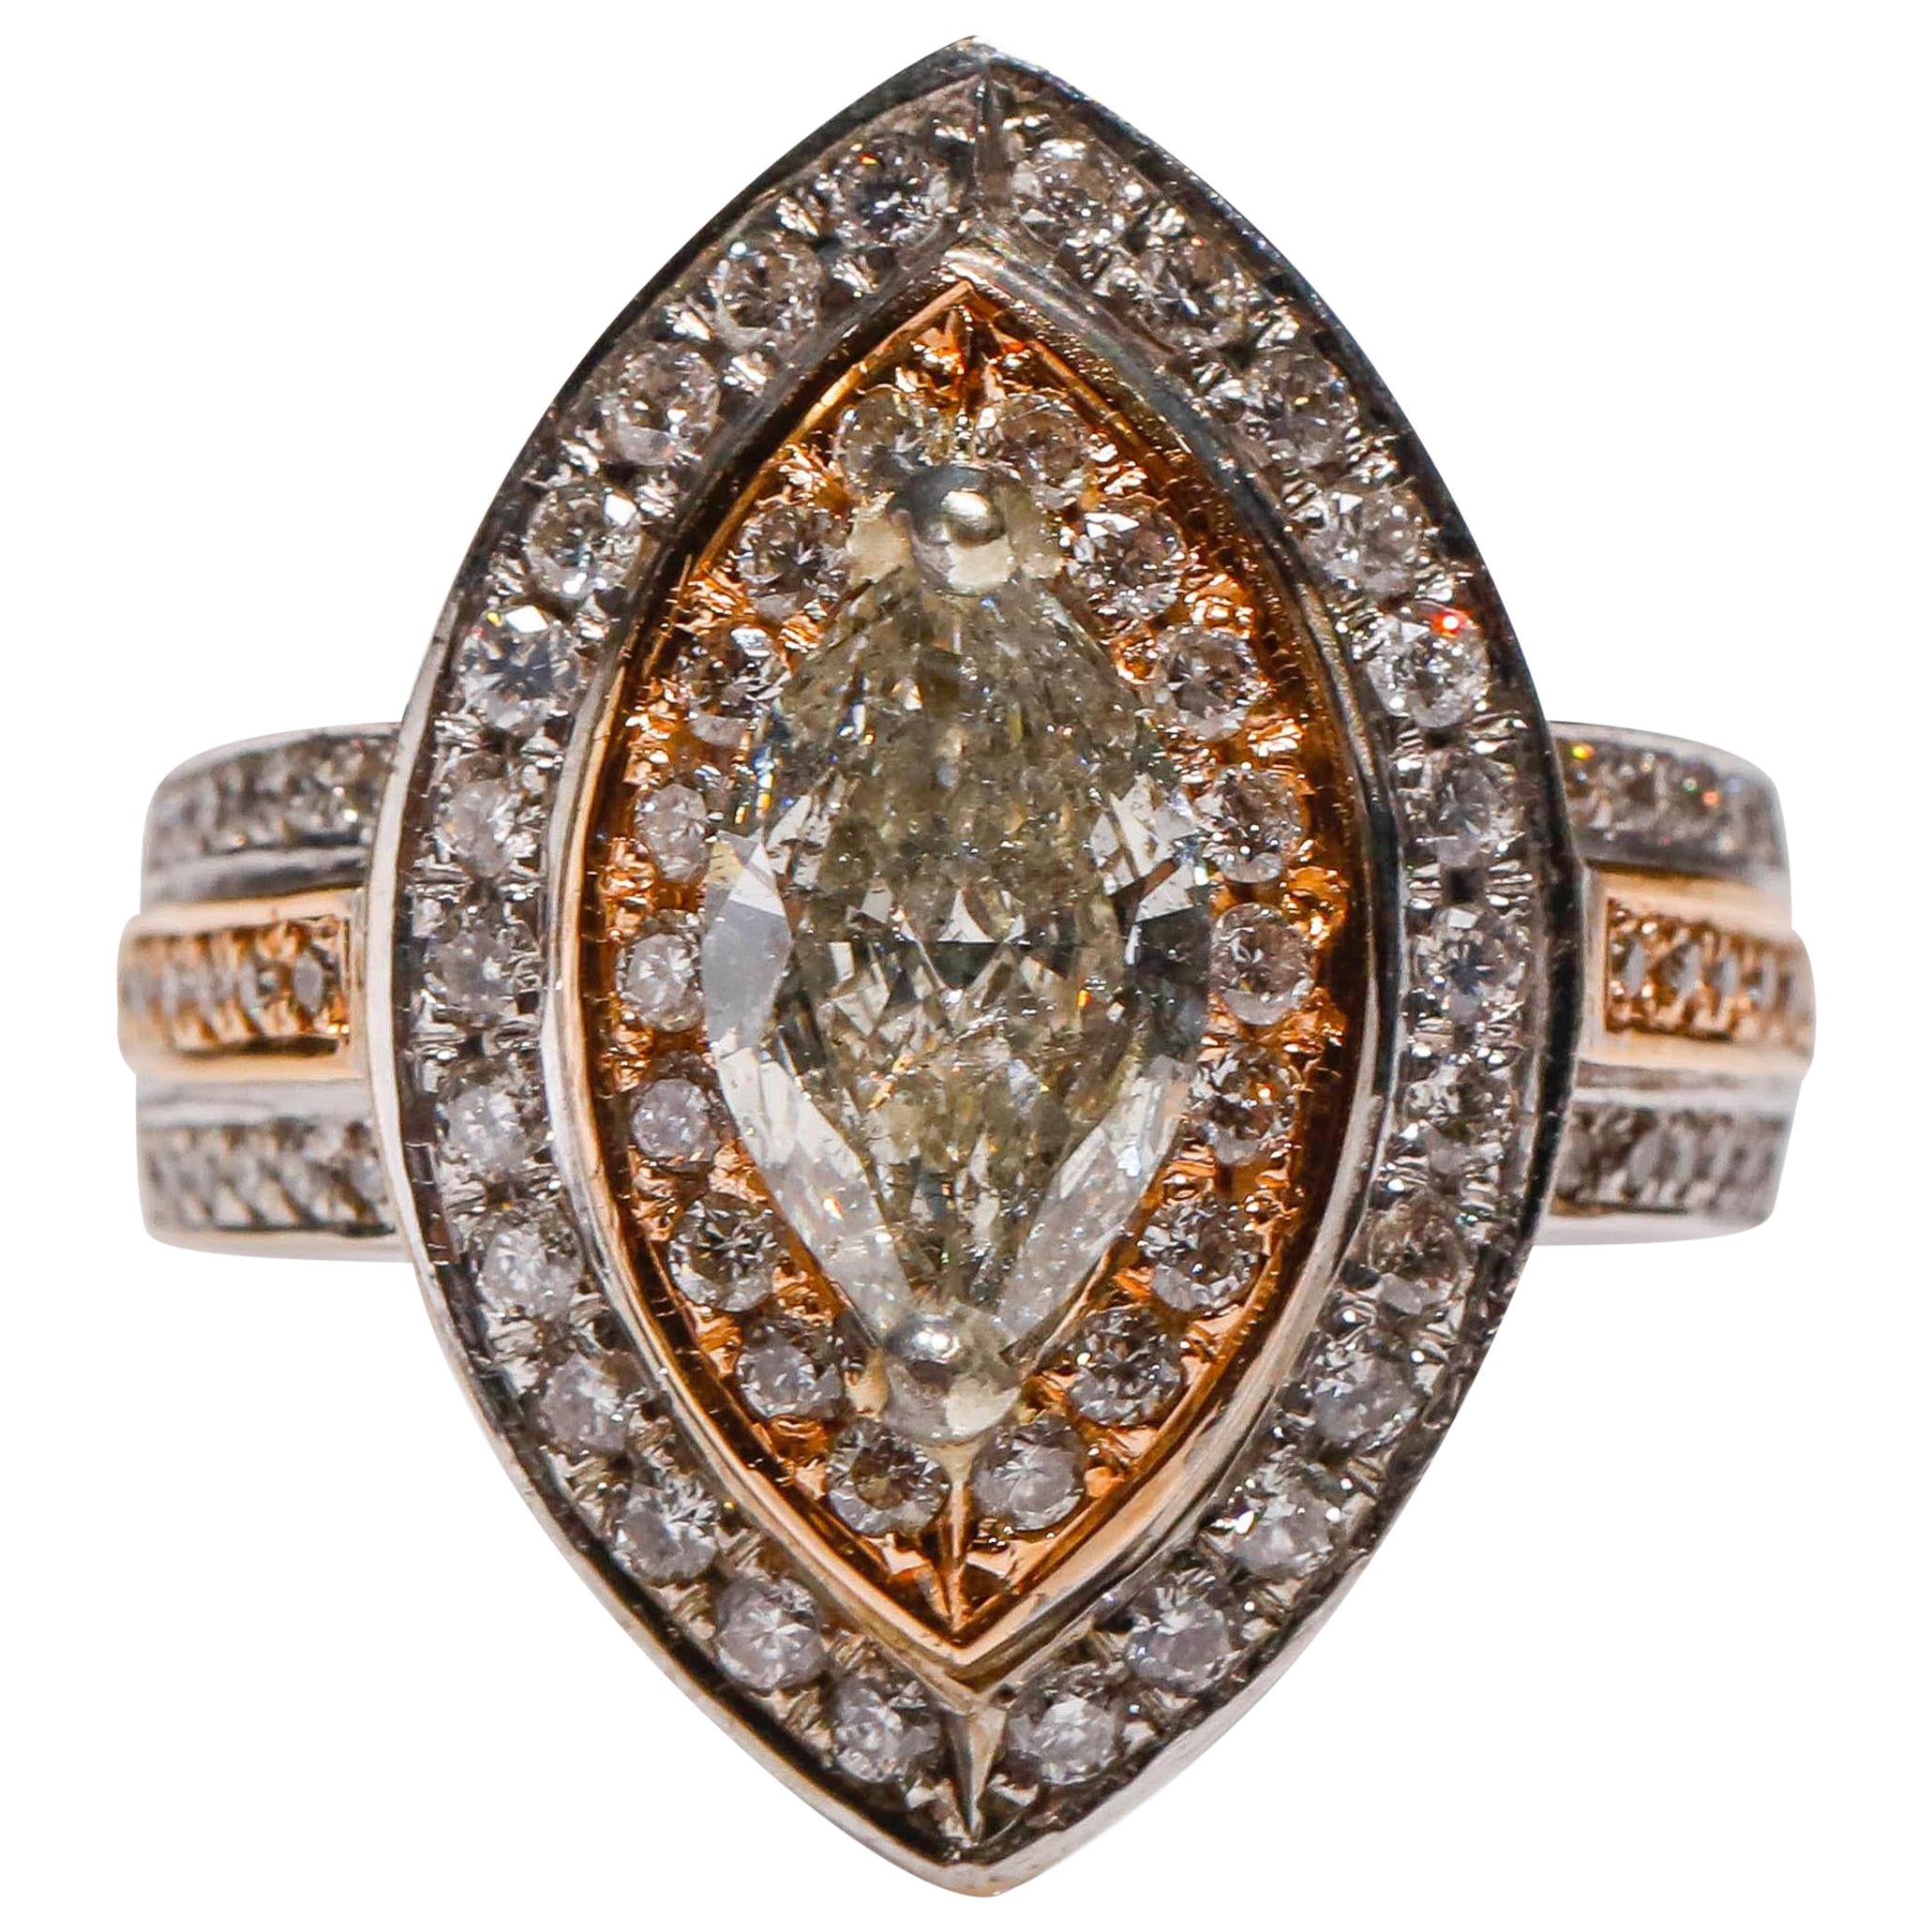 18 Karat Two-Tone Gold 2.9 Ct Marquise Shape Diamond Engagement Ring

Crafted in 18 kt Two-Tone Gold, this Unique design showcases a white Diamond 2.9 TCW Marquise diamond, set in a solid two-tone Gold, Polished to a brilliant shine.

Gold Purity: